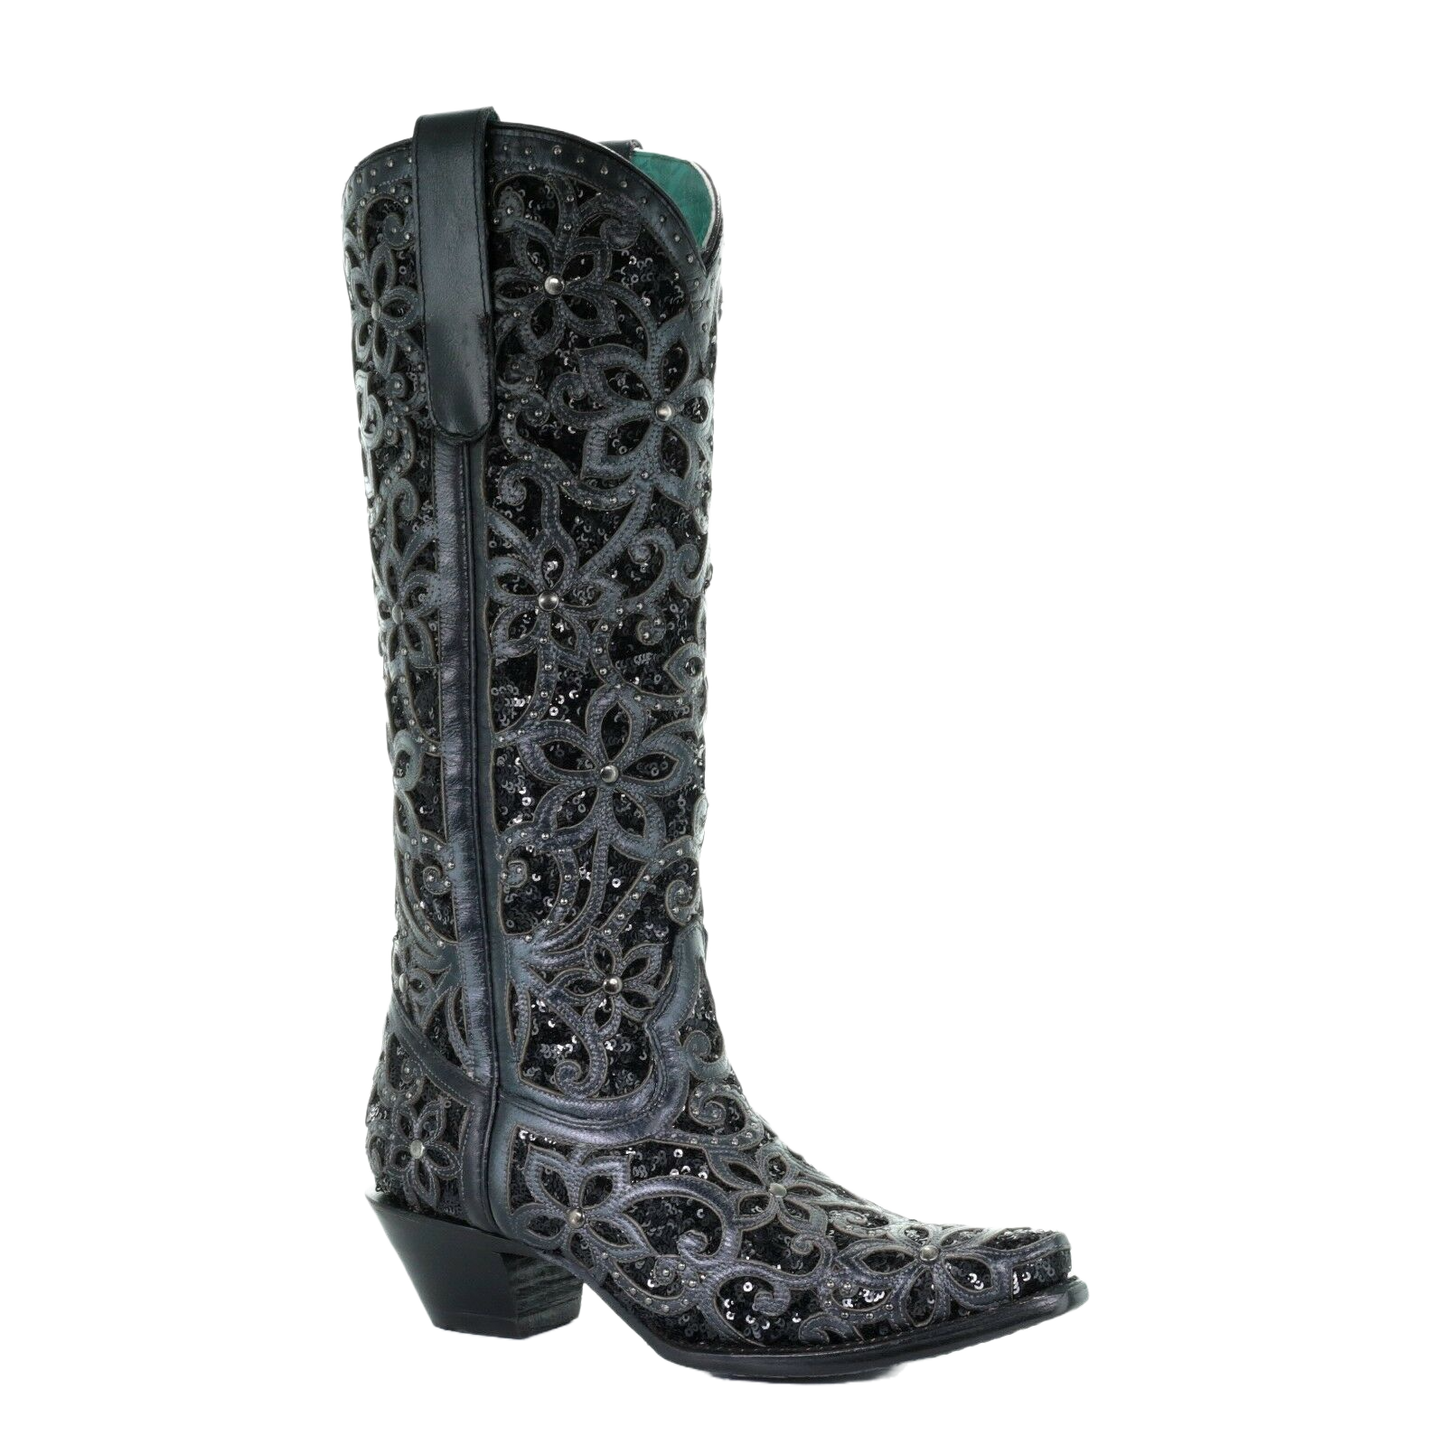 Corral Ladies Black Full Inlay & Studs Tall Top Boots A3589